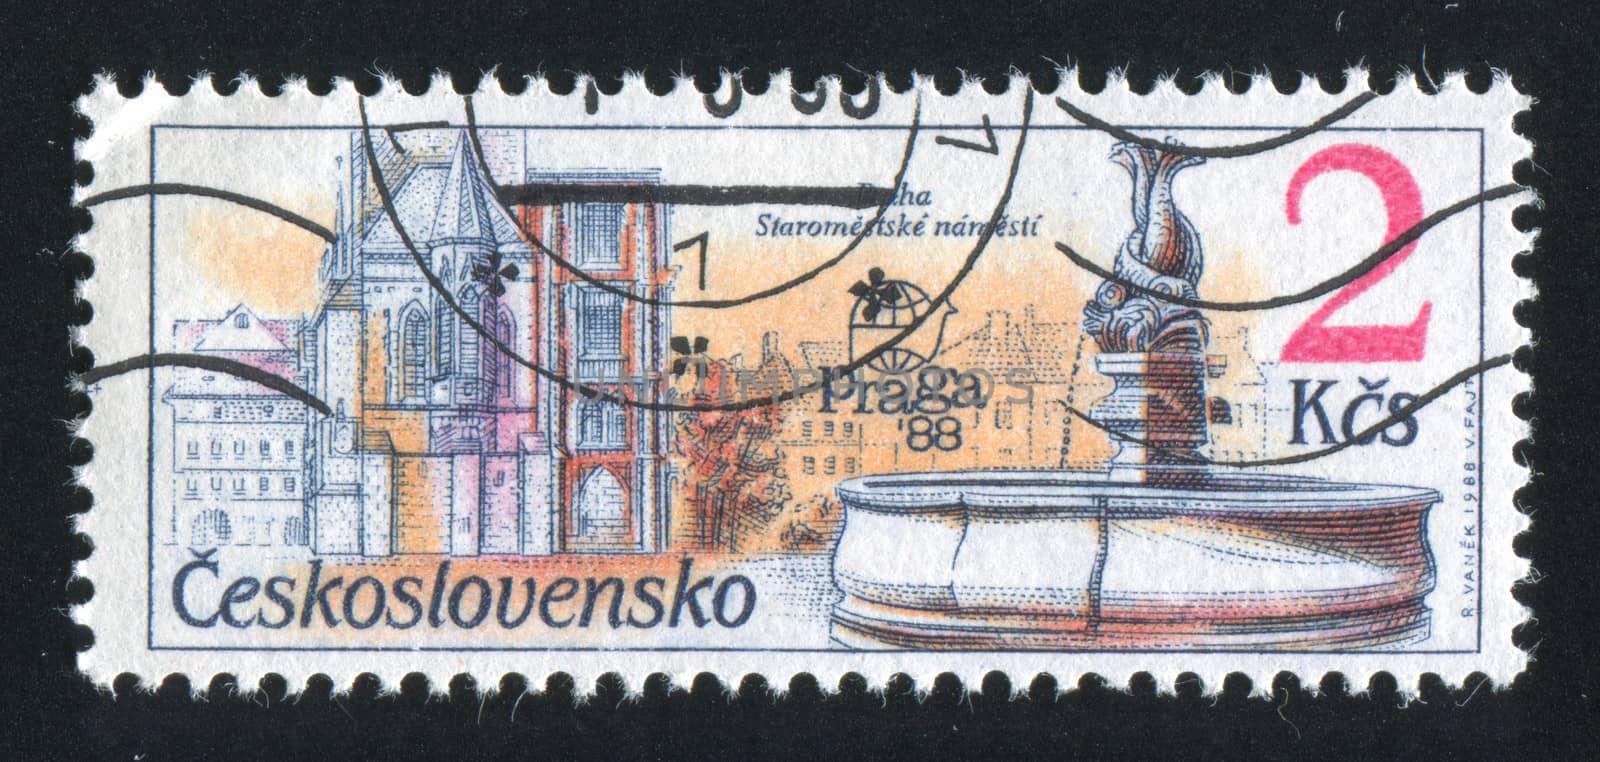 CZECHOSLOVAKIA - CIRCA 1988: stamp printed by Czechoslovakia, shows Exhibition emblem and Old town square, circa 1988